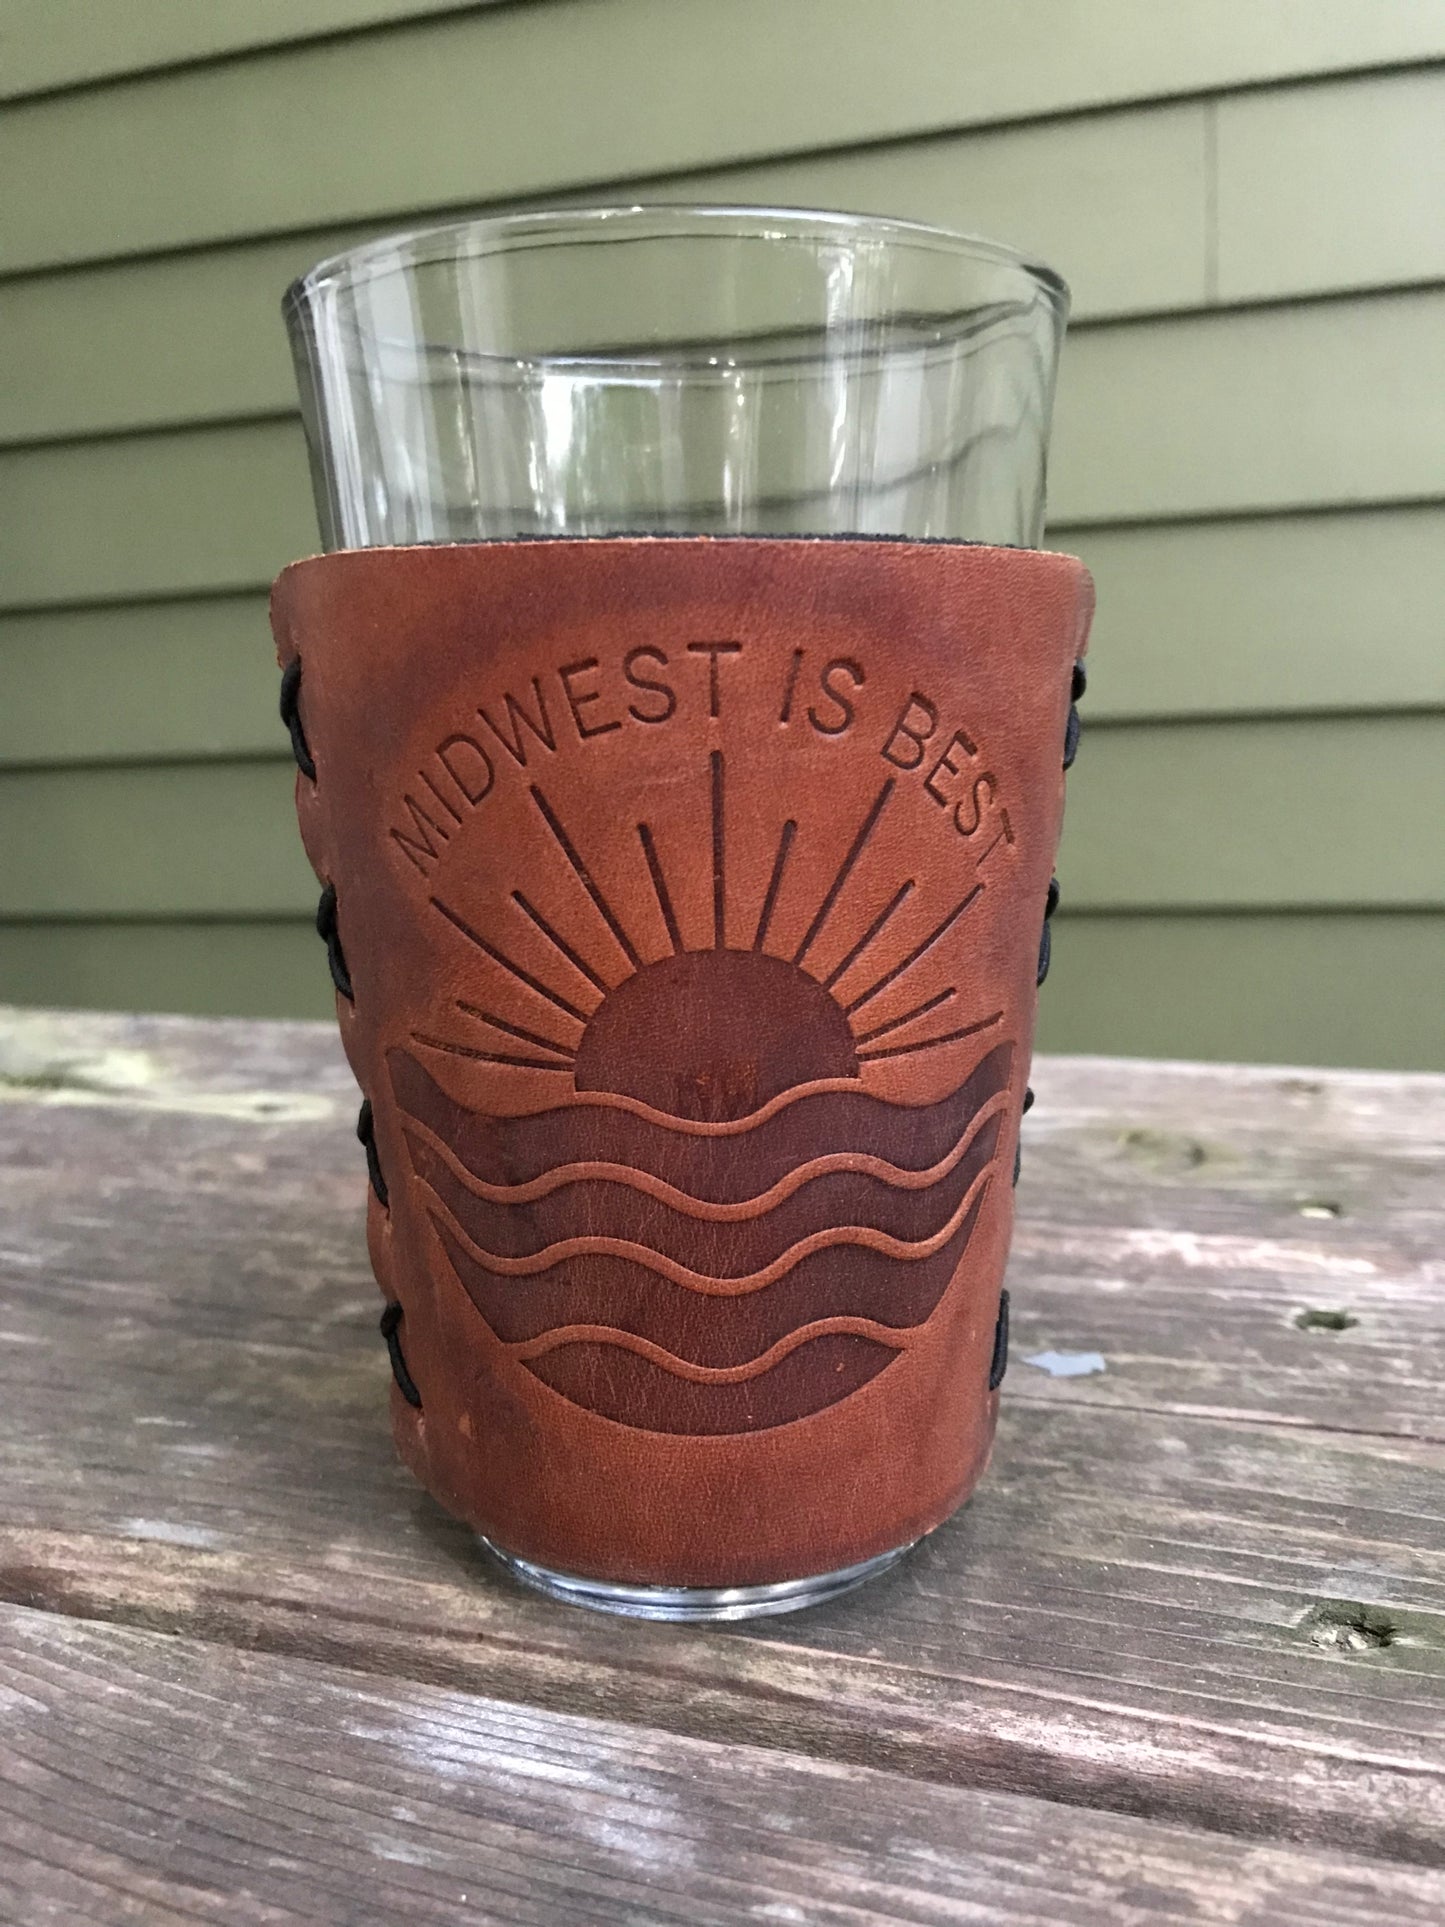 Beer Glass - Midwest is Best